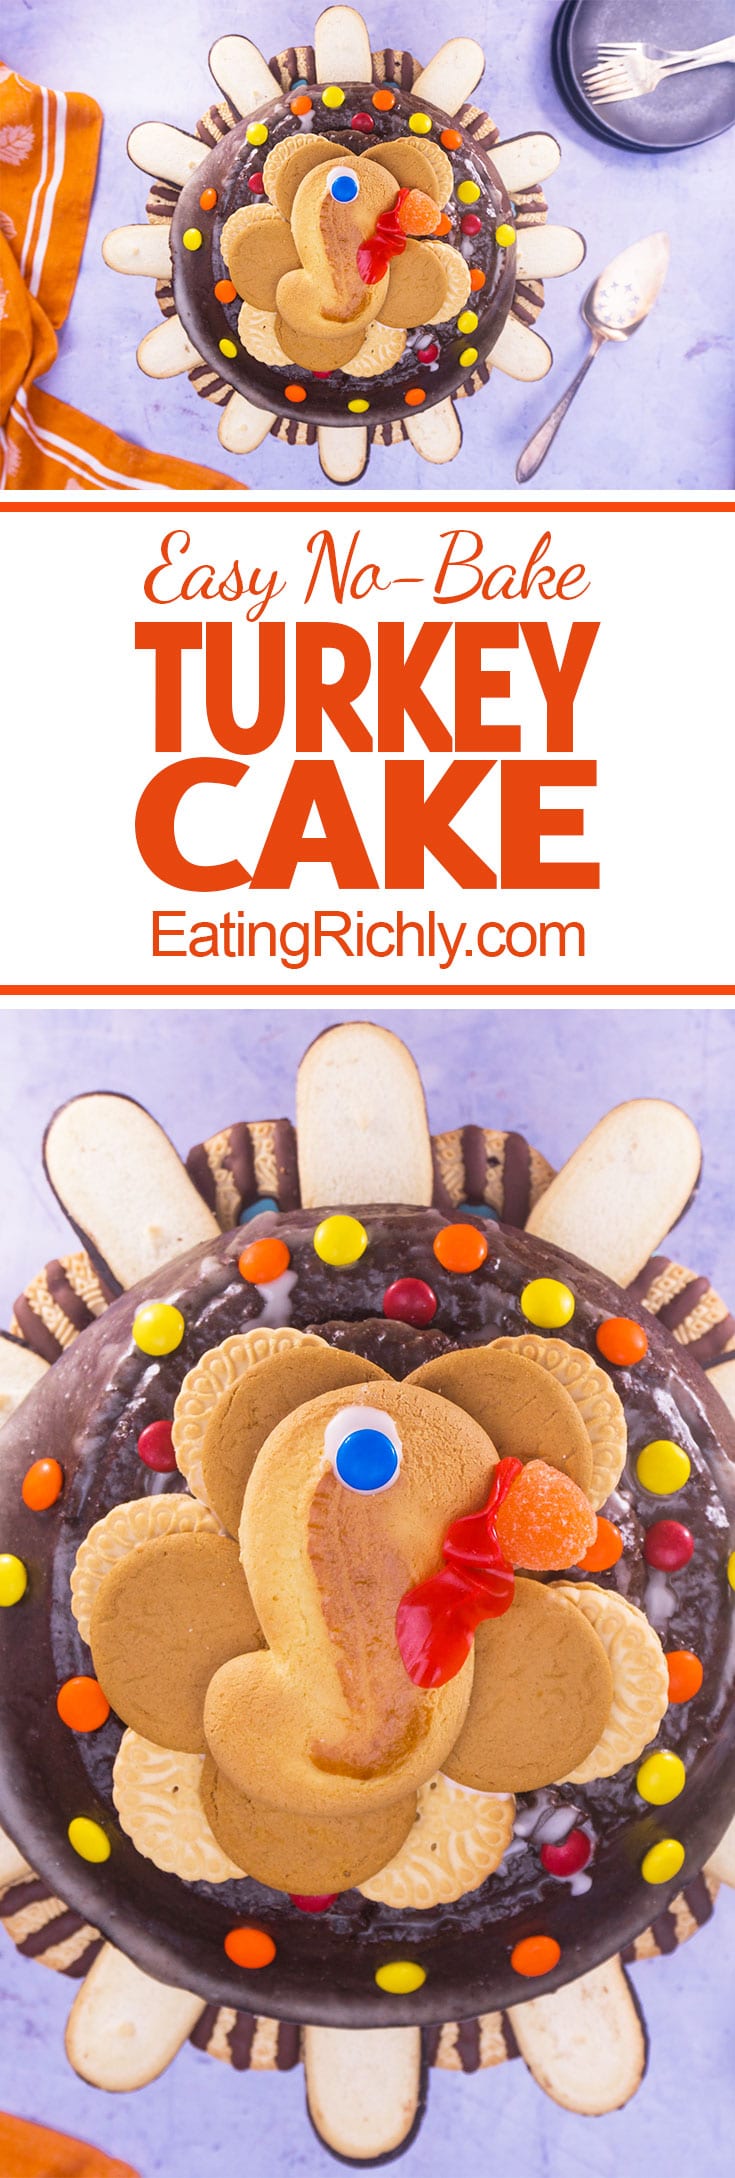 This easy turkey cake is made from a store bought chocolate bundt cake and packaged cookies and candy, so it's no-bake and fast to make! From EatingRichly.com